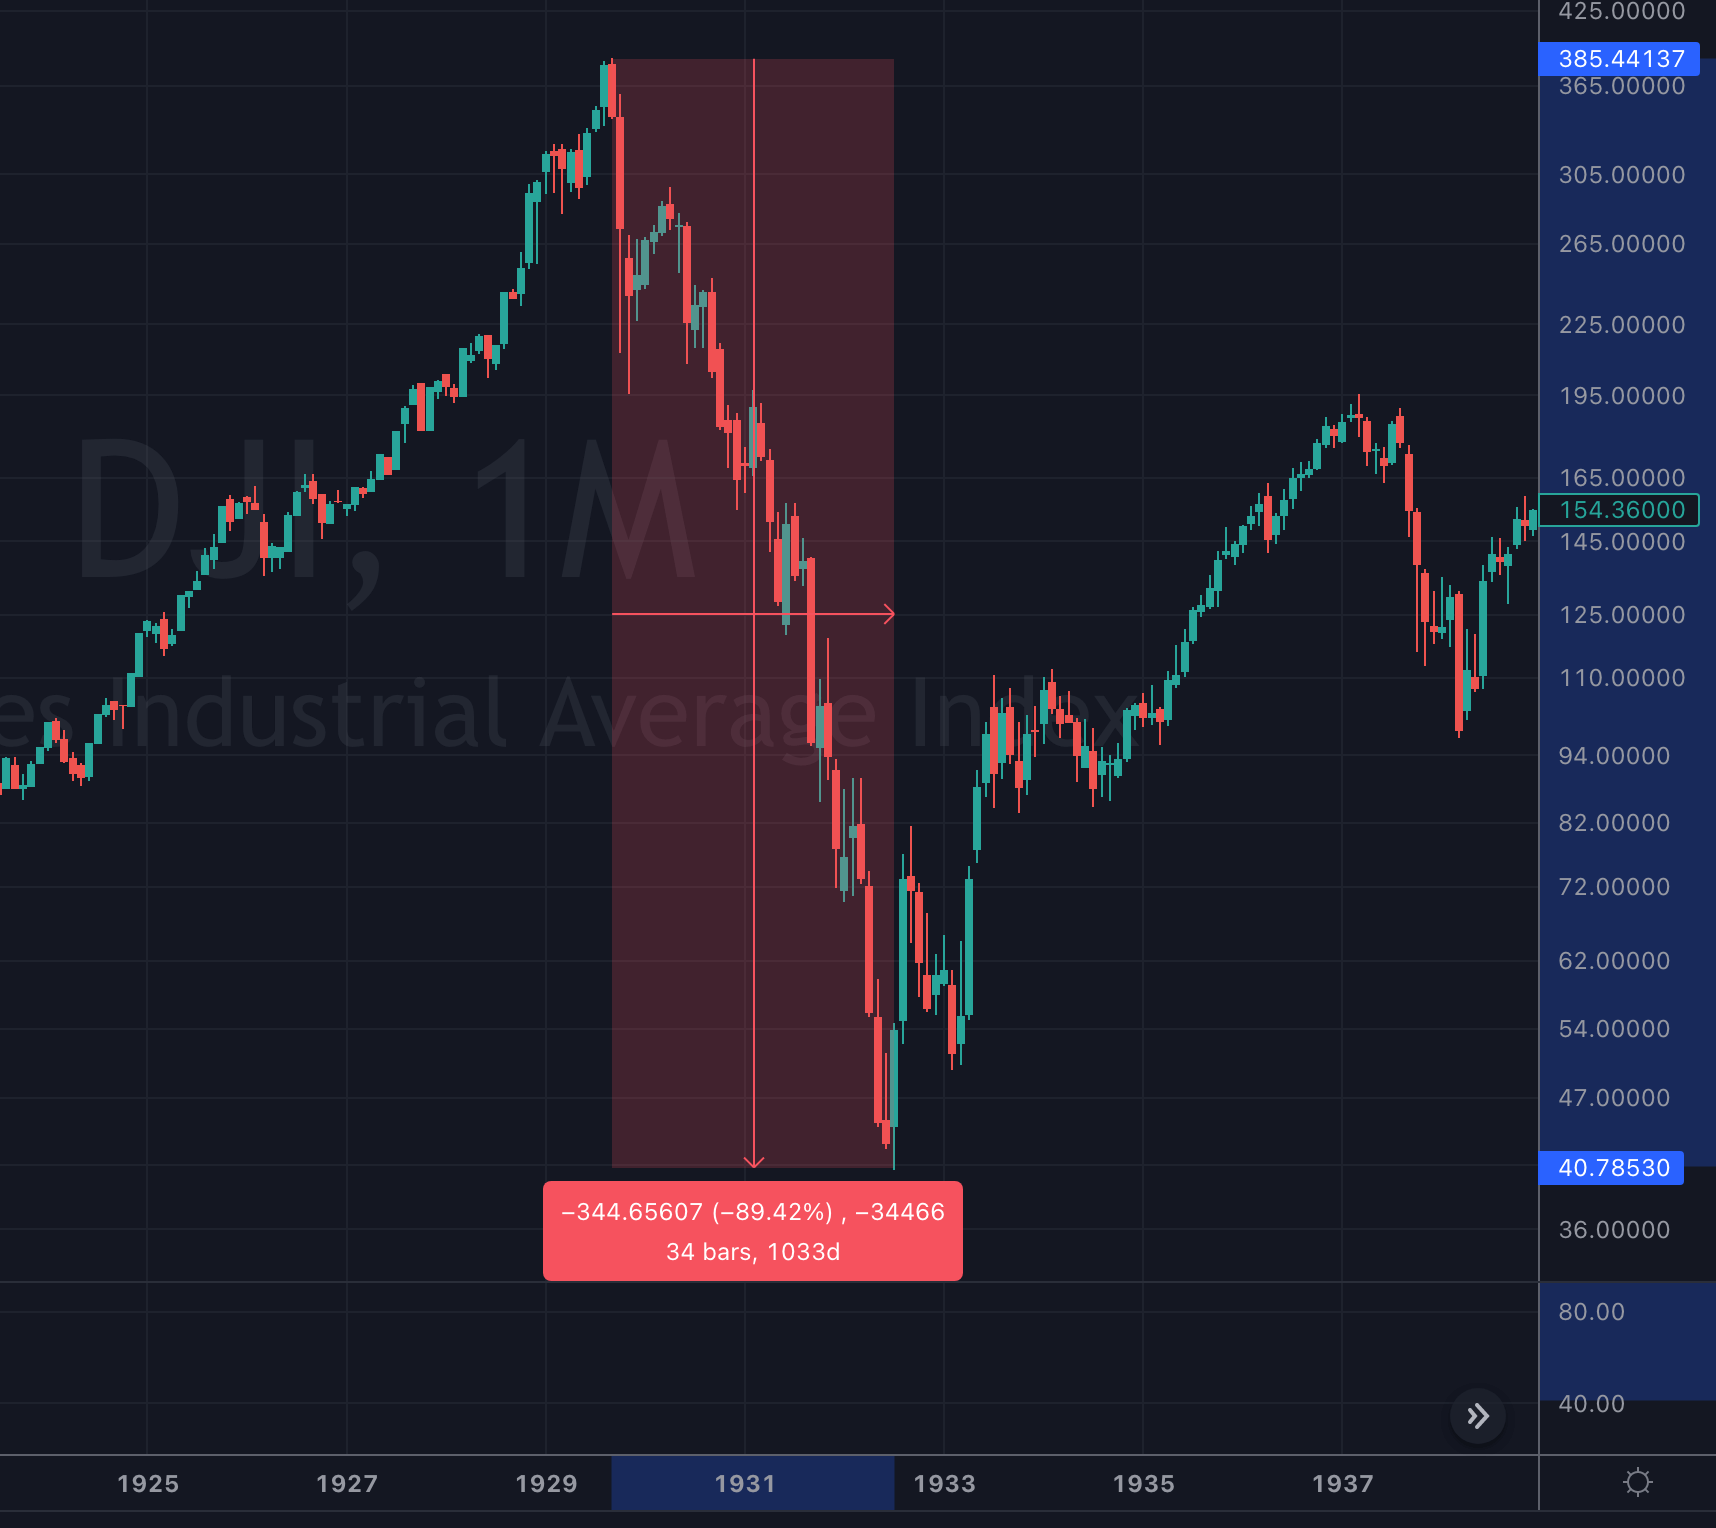 dow jones pullback 90% during great depression of 20th century